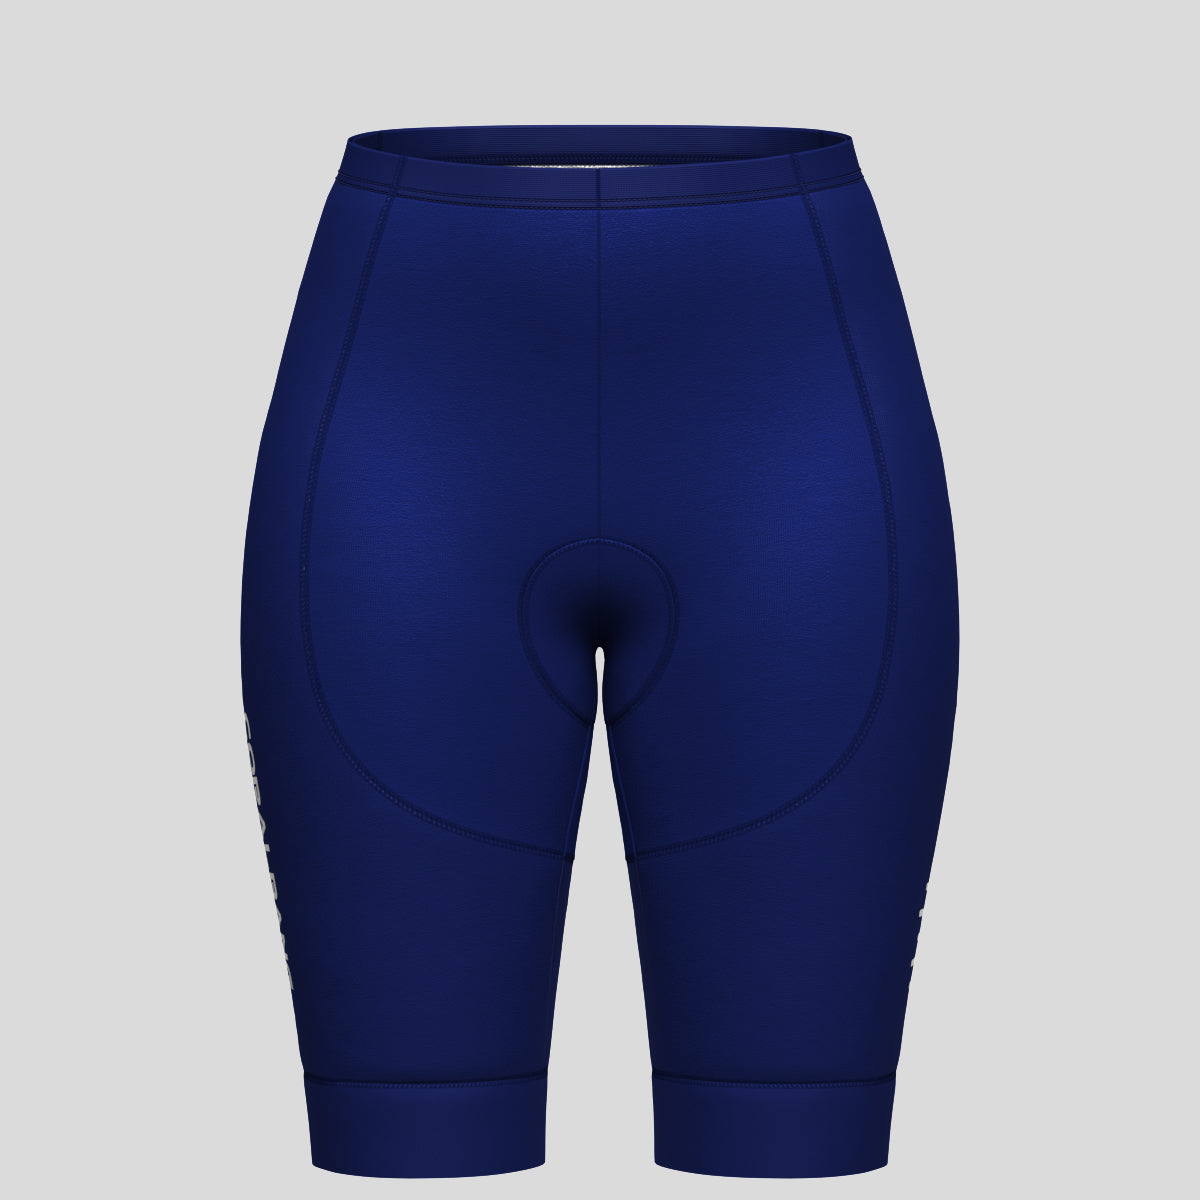 Minimal Solid Women's Cycling Shorts - Ink